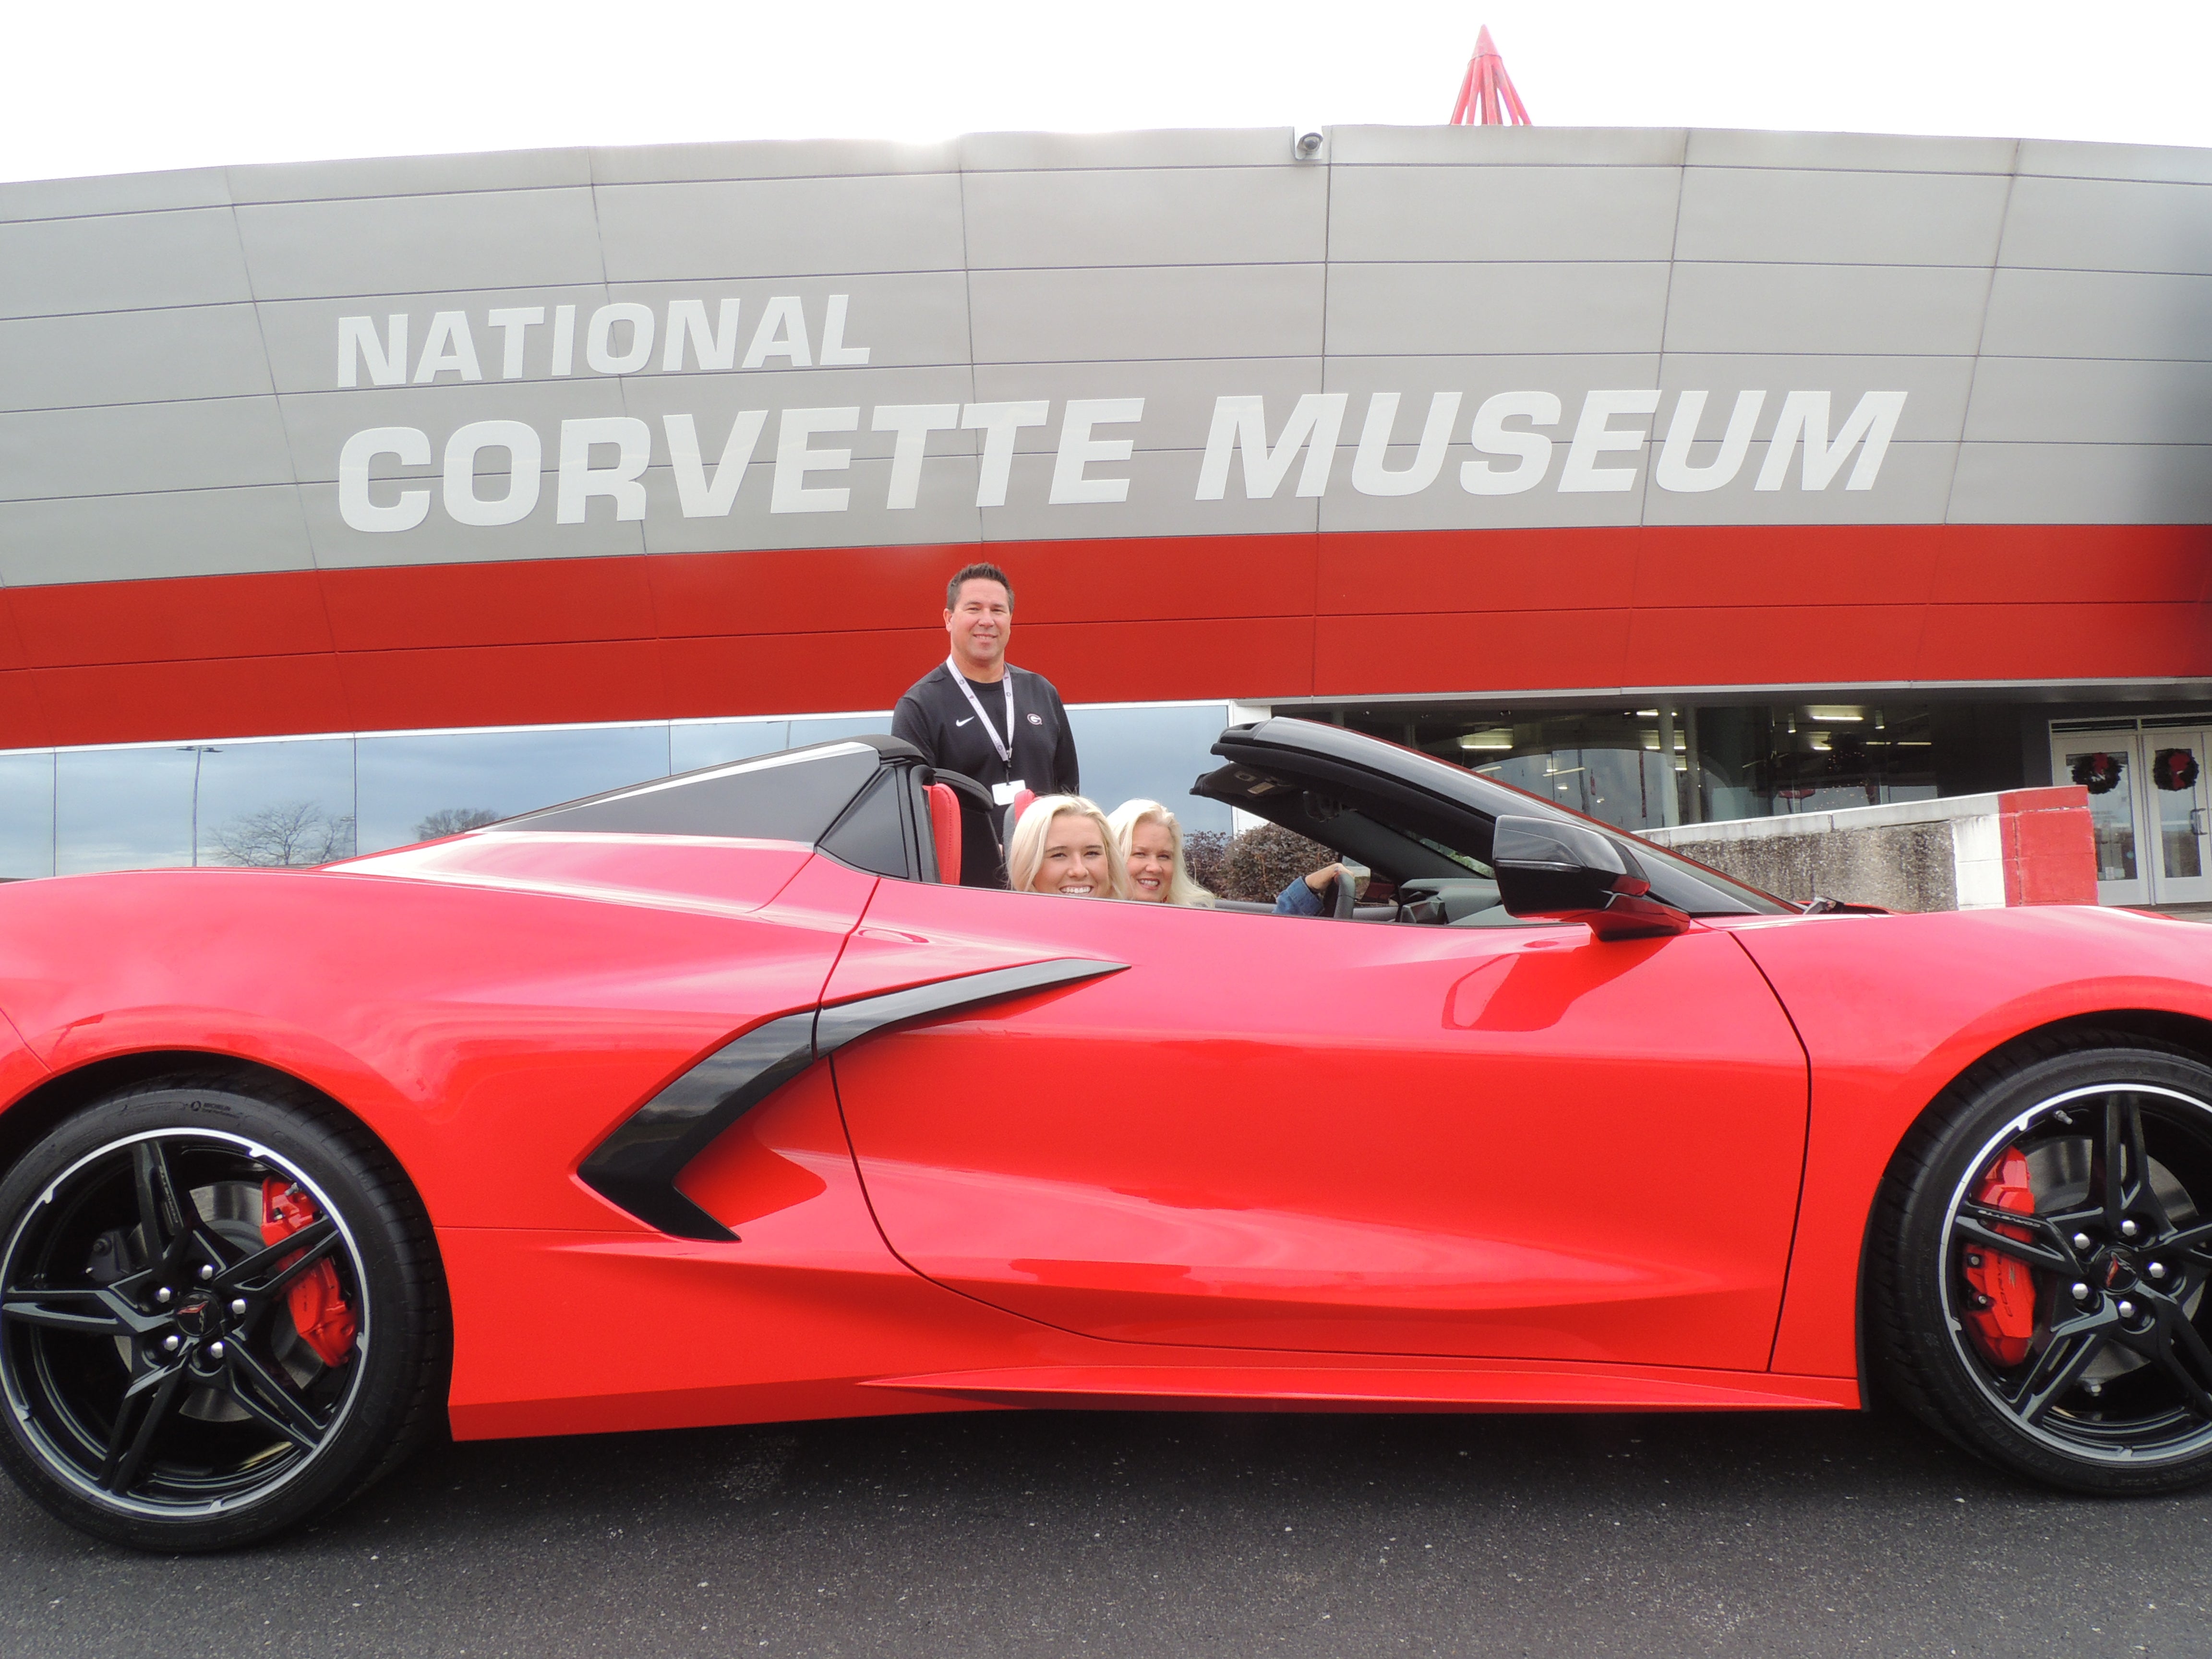 R8C Delivery Customers in a torch red Corvette